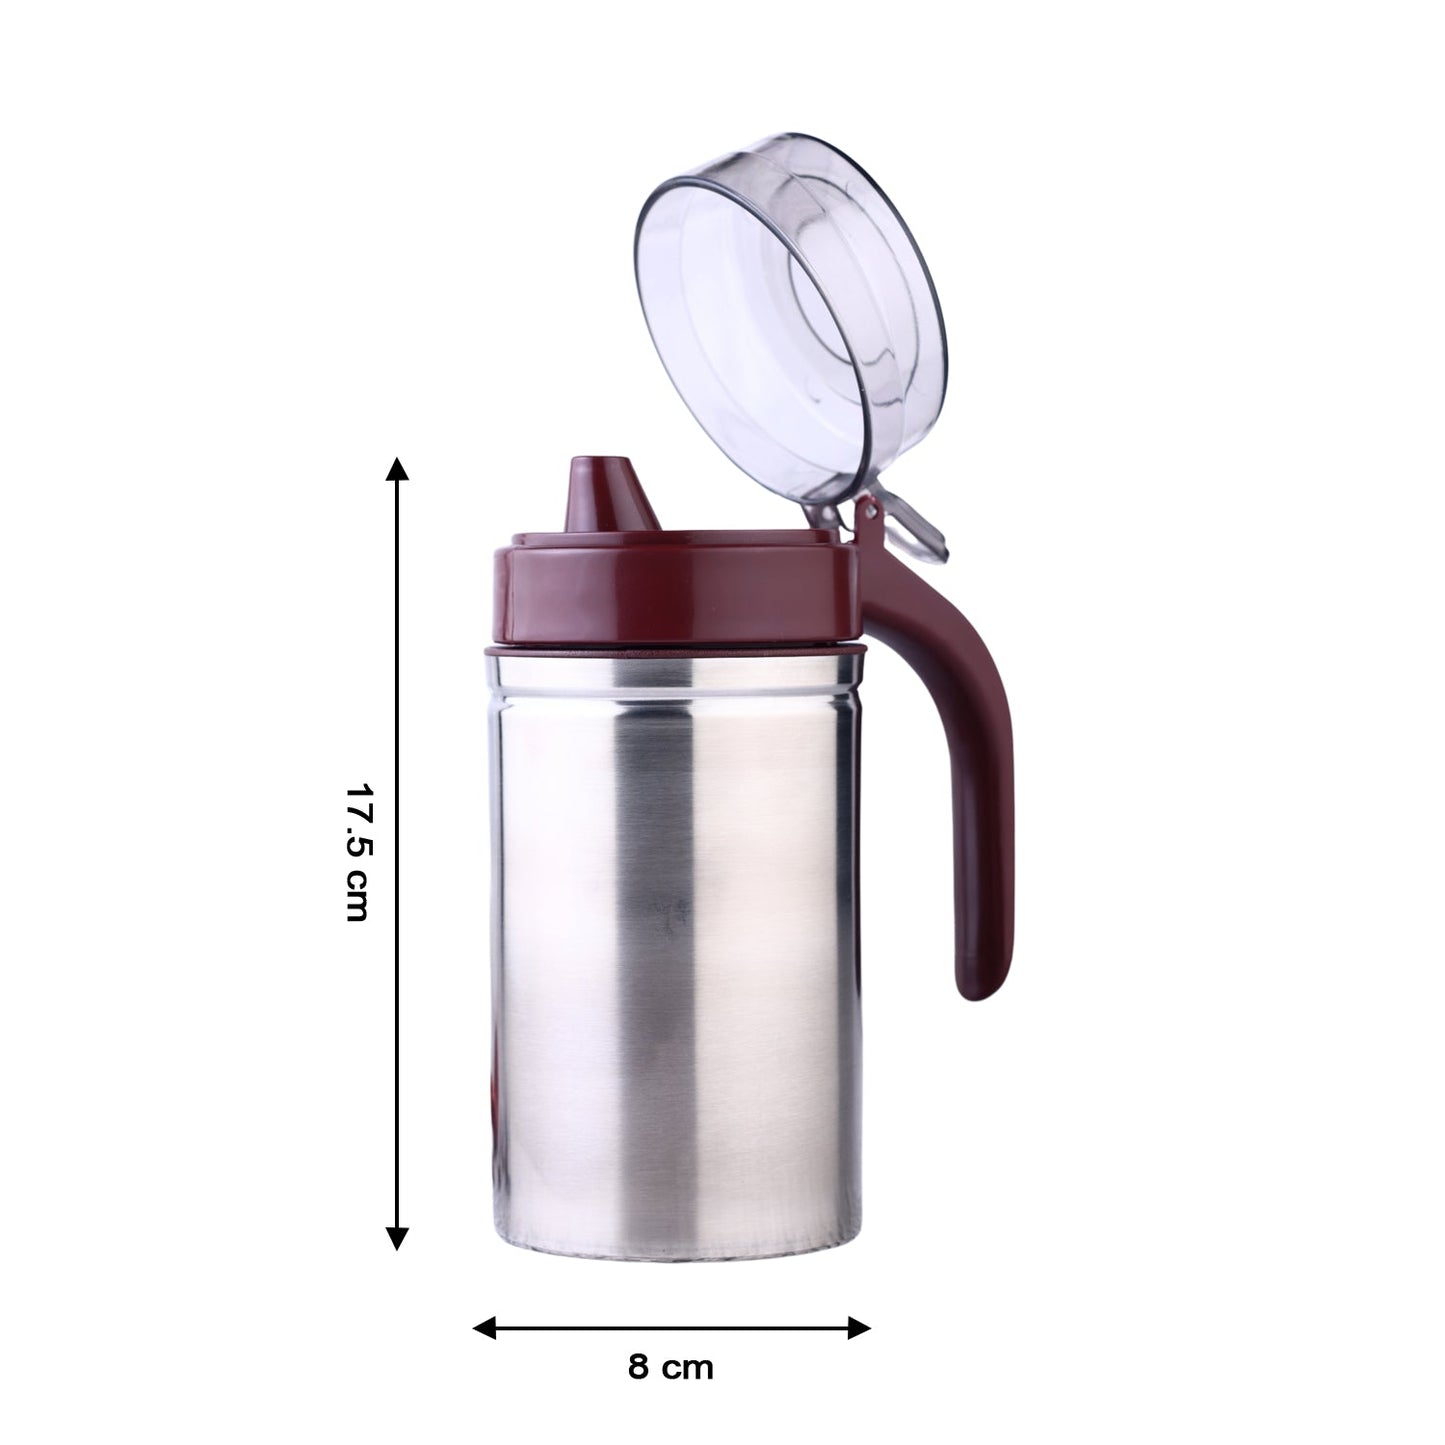 Oil Dispenser Stainless Steel with small nozzle 500ML Oil Container.